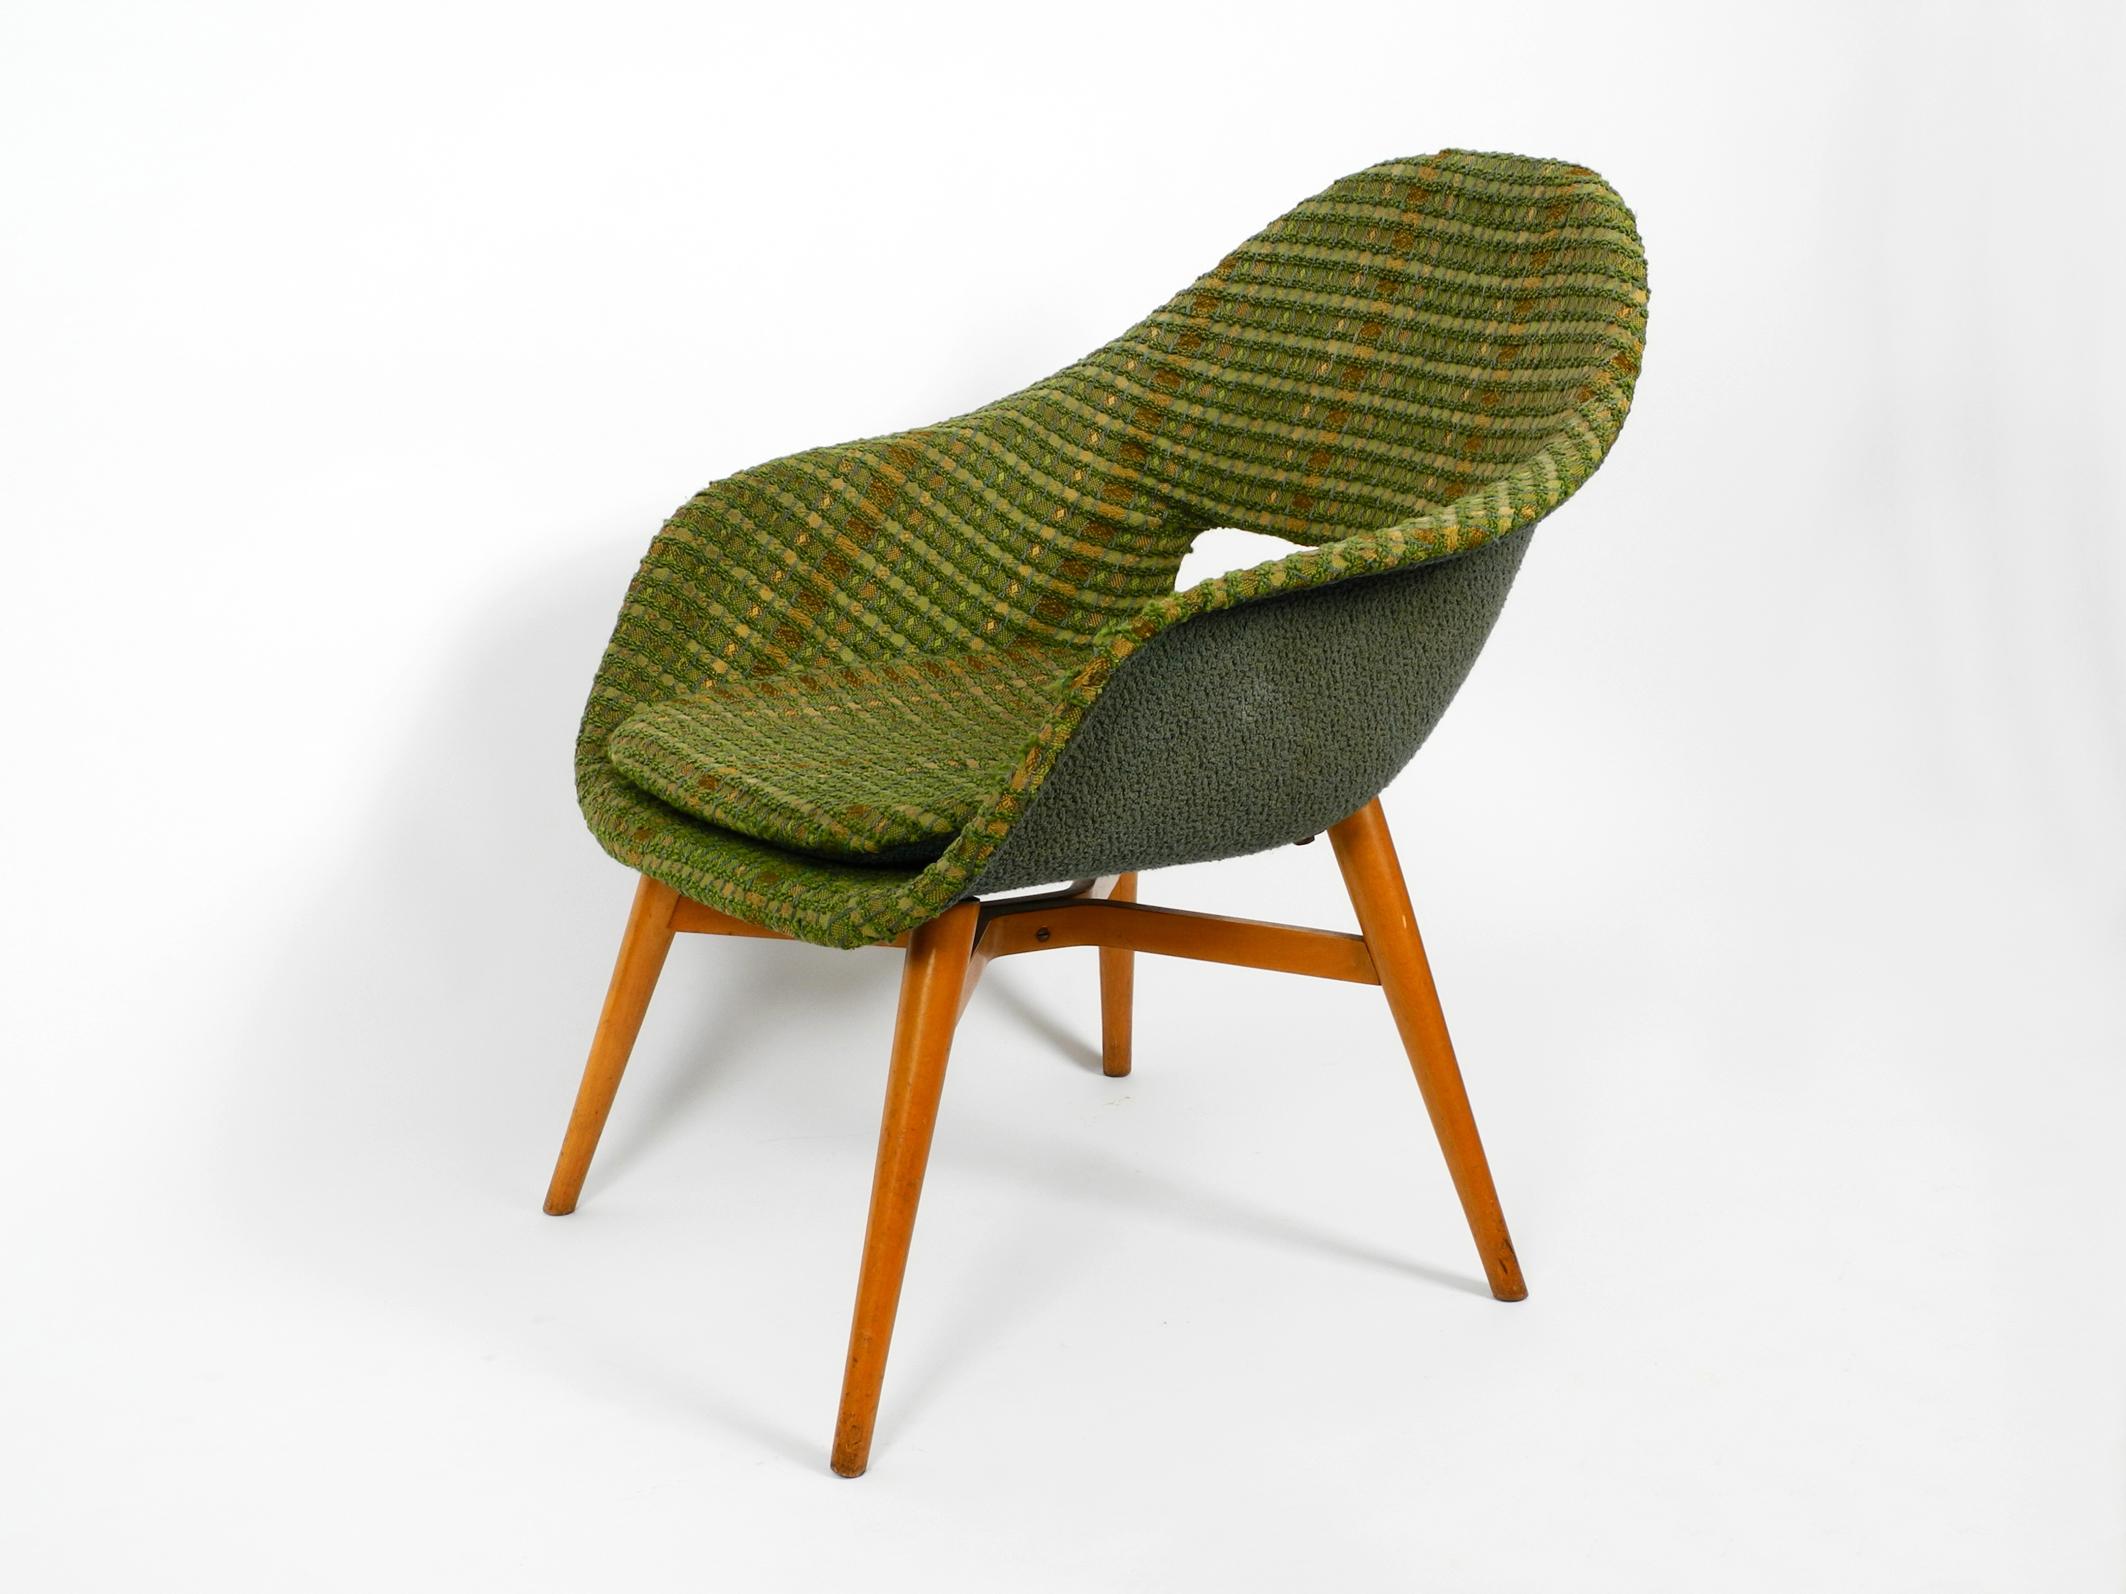 1960s Lounge Chair by Miroslav Navratil with Fiberglass Shell and Original Cover 3